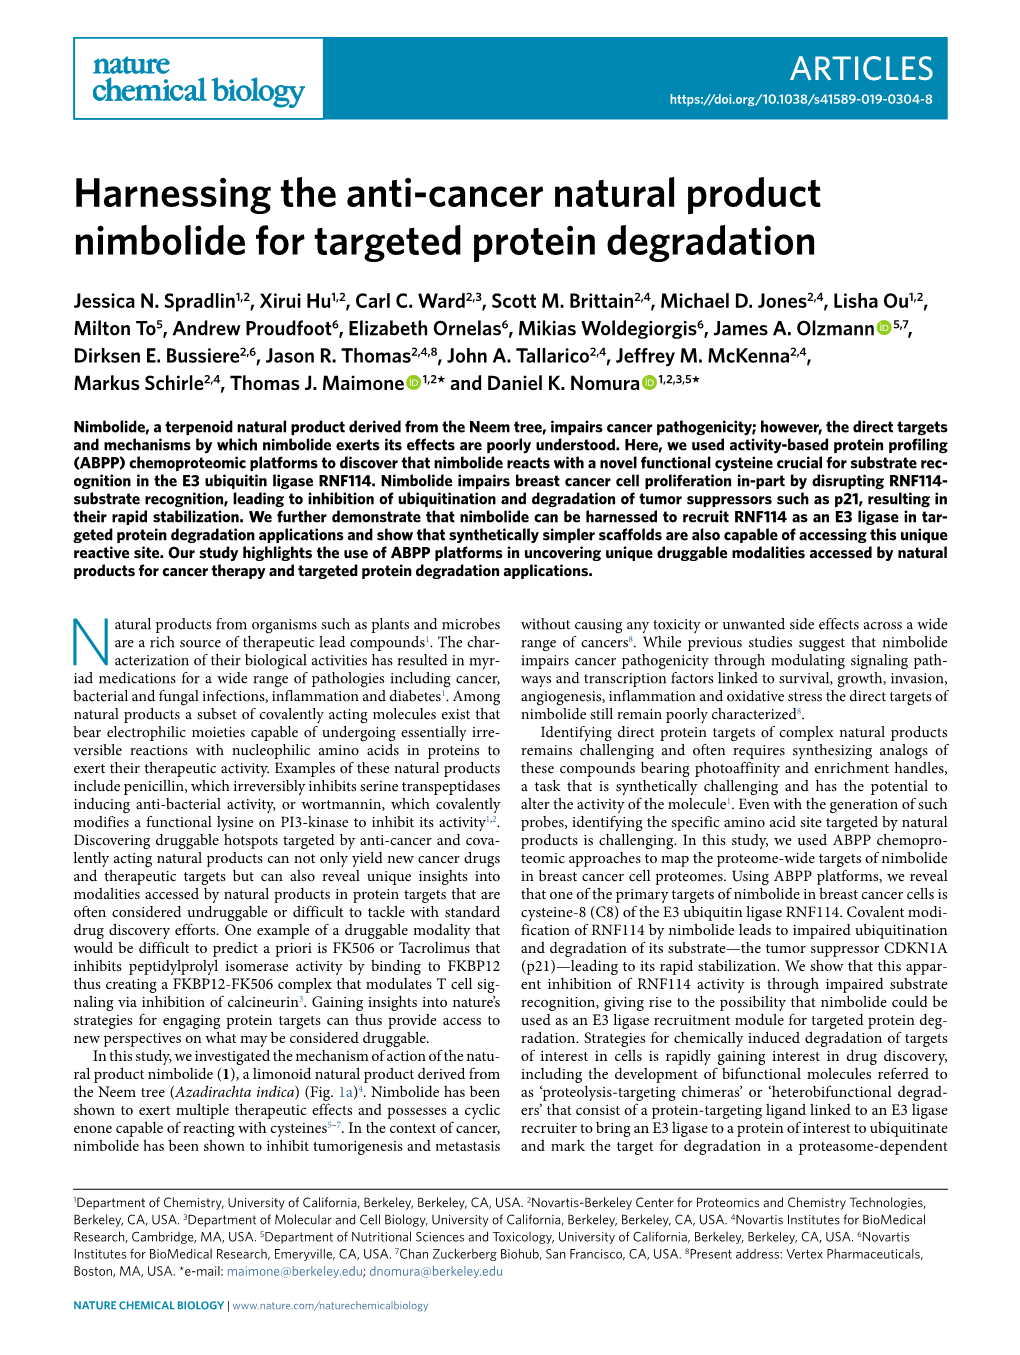 Harnessing the Anti-Cancer Natural Product Nimbolide for Targeted Protein Degradation